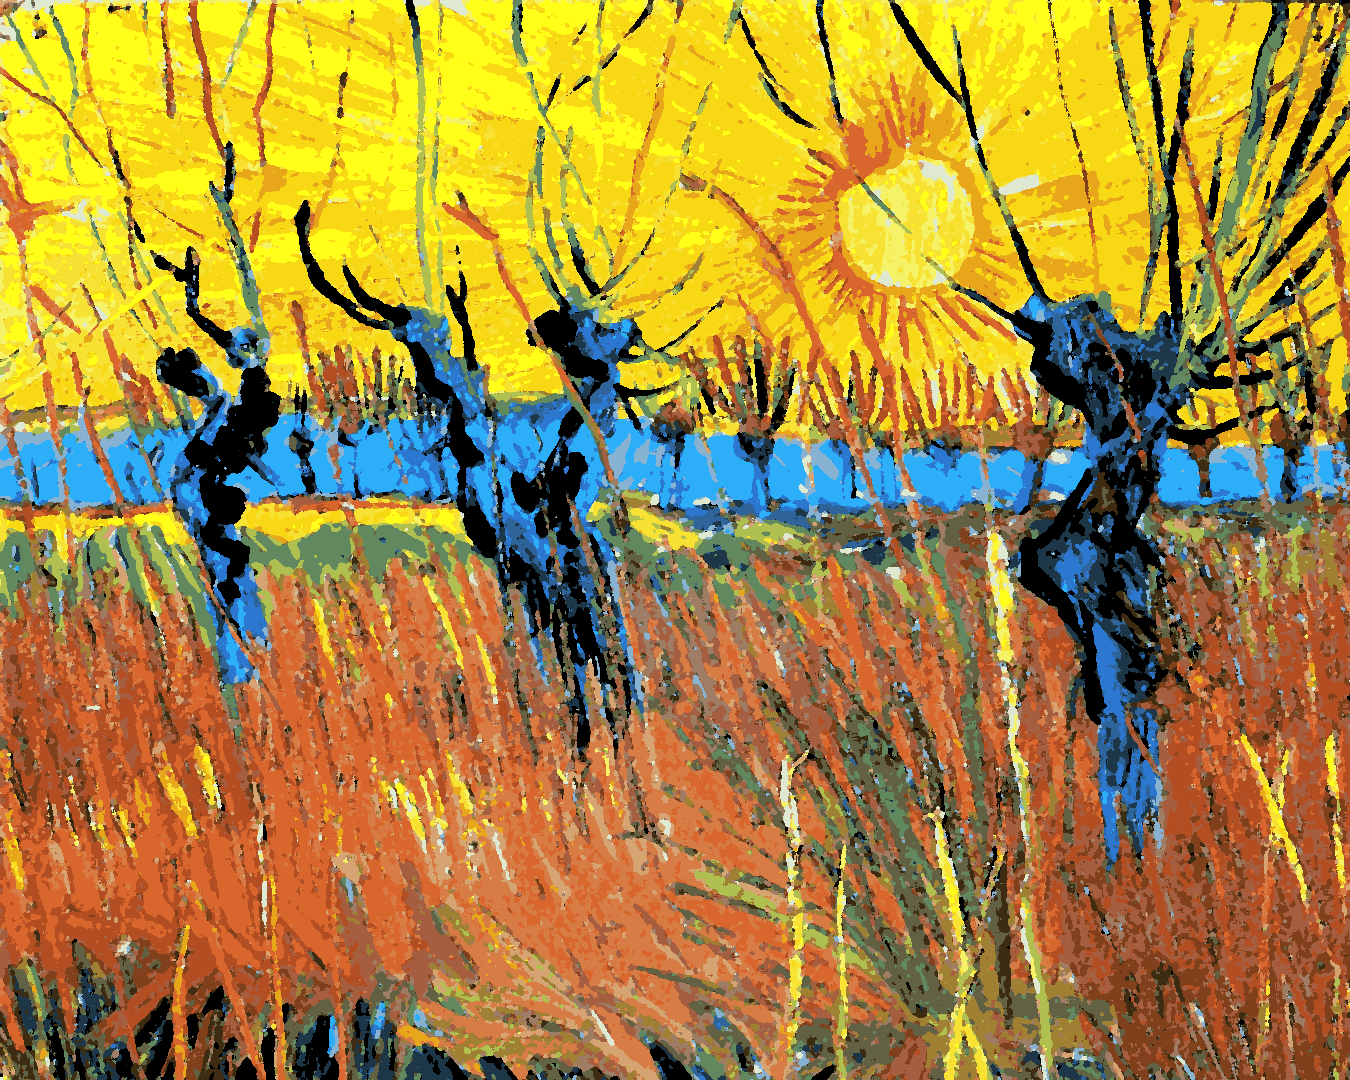 Vincent Van Gogh PD (202) - Willows at Sunset - Van-Go Paint-By-Number Kit